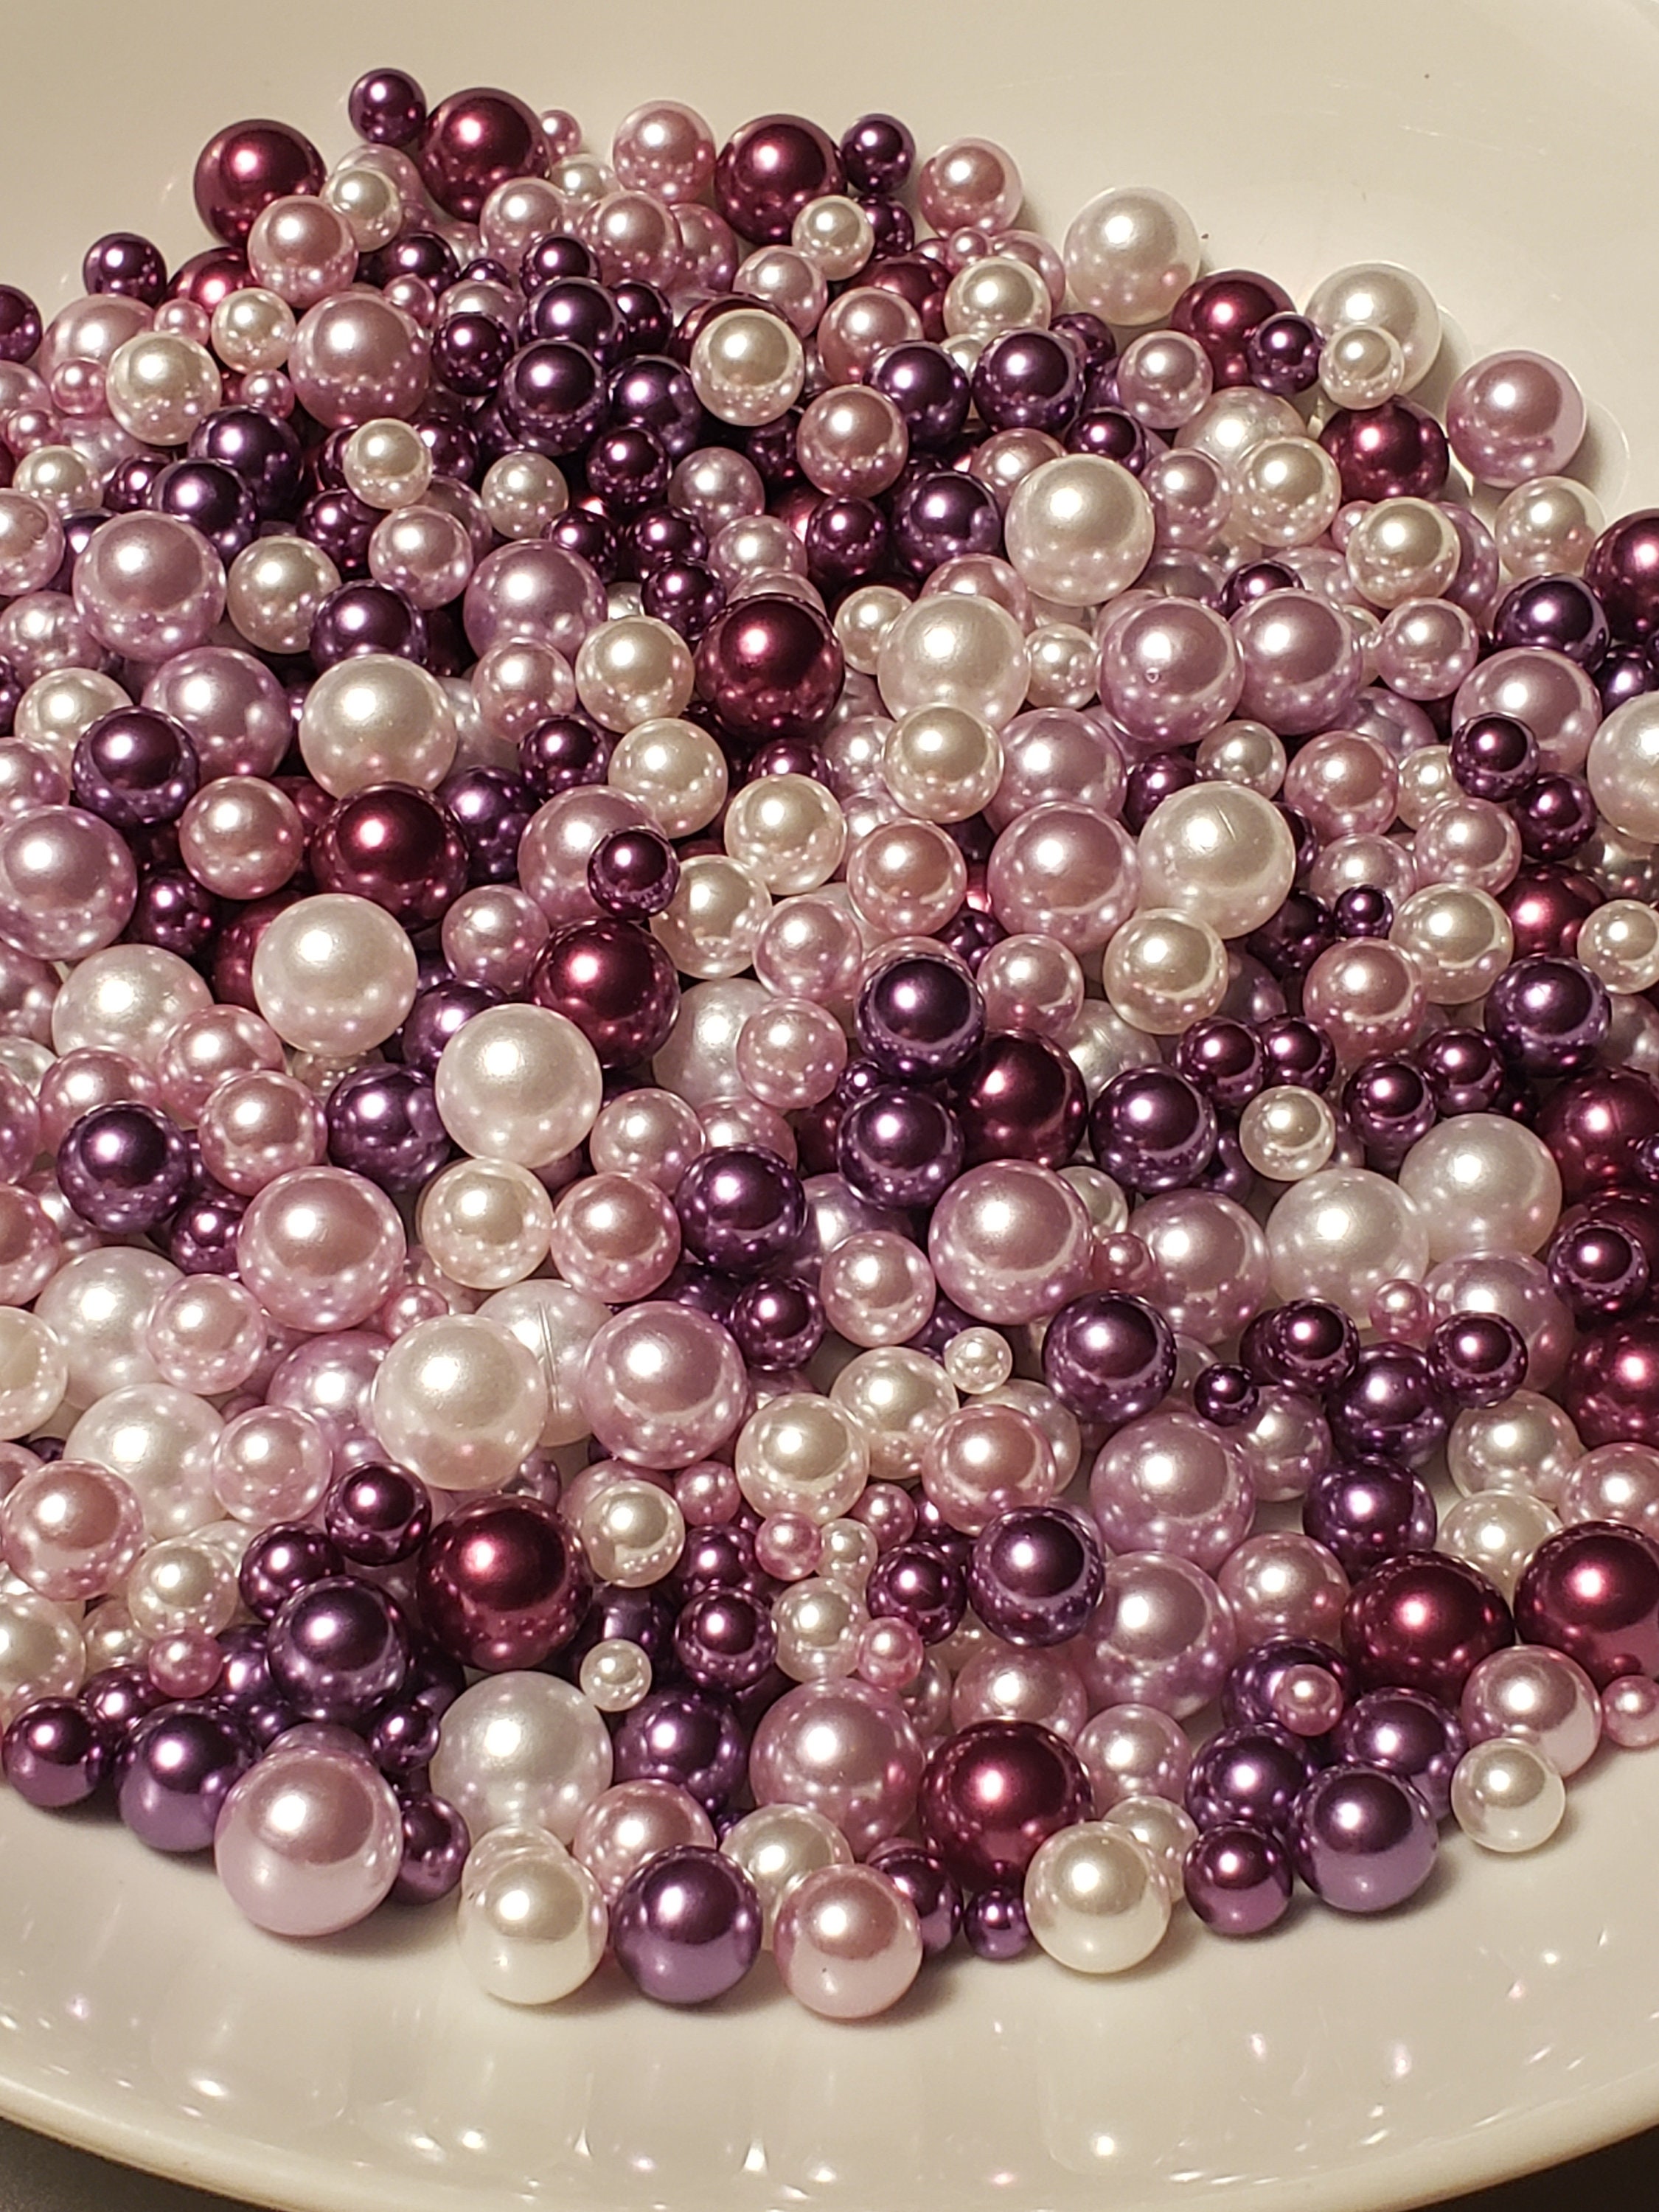 Niziky 900PCS 3-8mm Crafts No Hole Pearls, Macaron Loose Pearls Beads  Without Holes, Round No Hole Pearls Vase Fillers, Pearls for Crafts,  Wedding